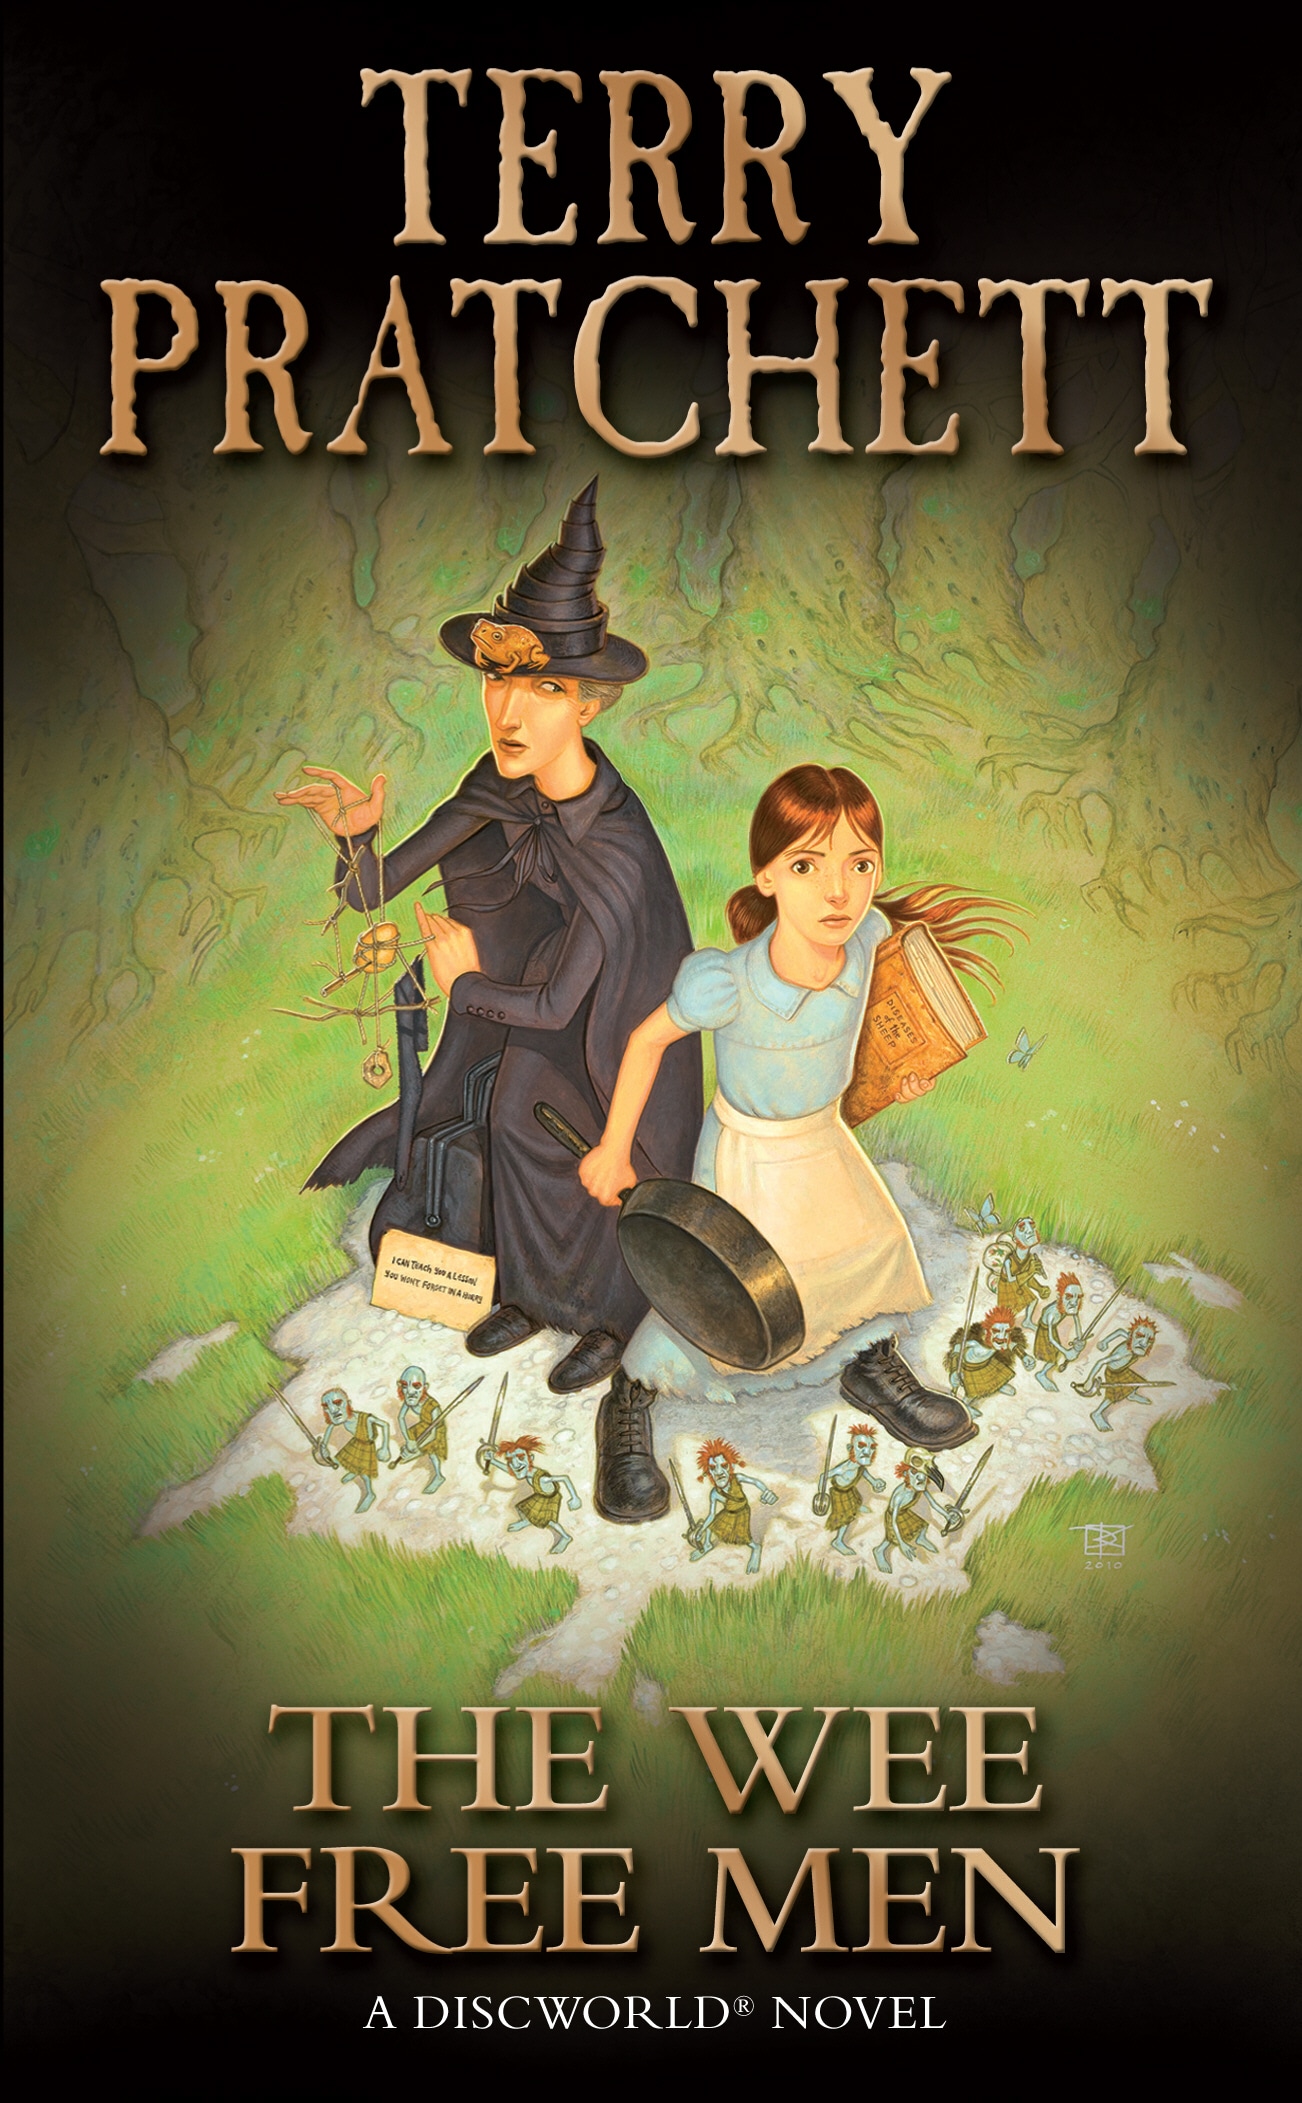 Book “The Wee Free Men” by Terry Pratchett — July 1, 2010